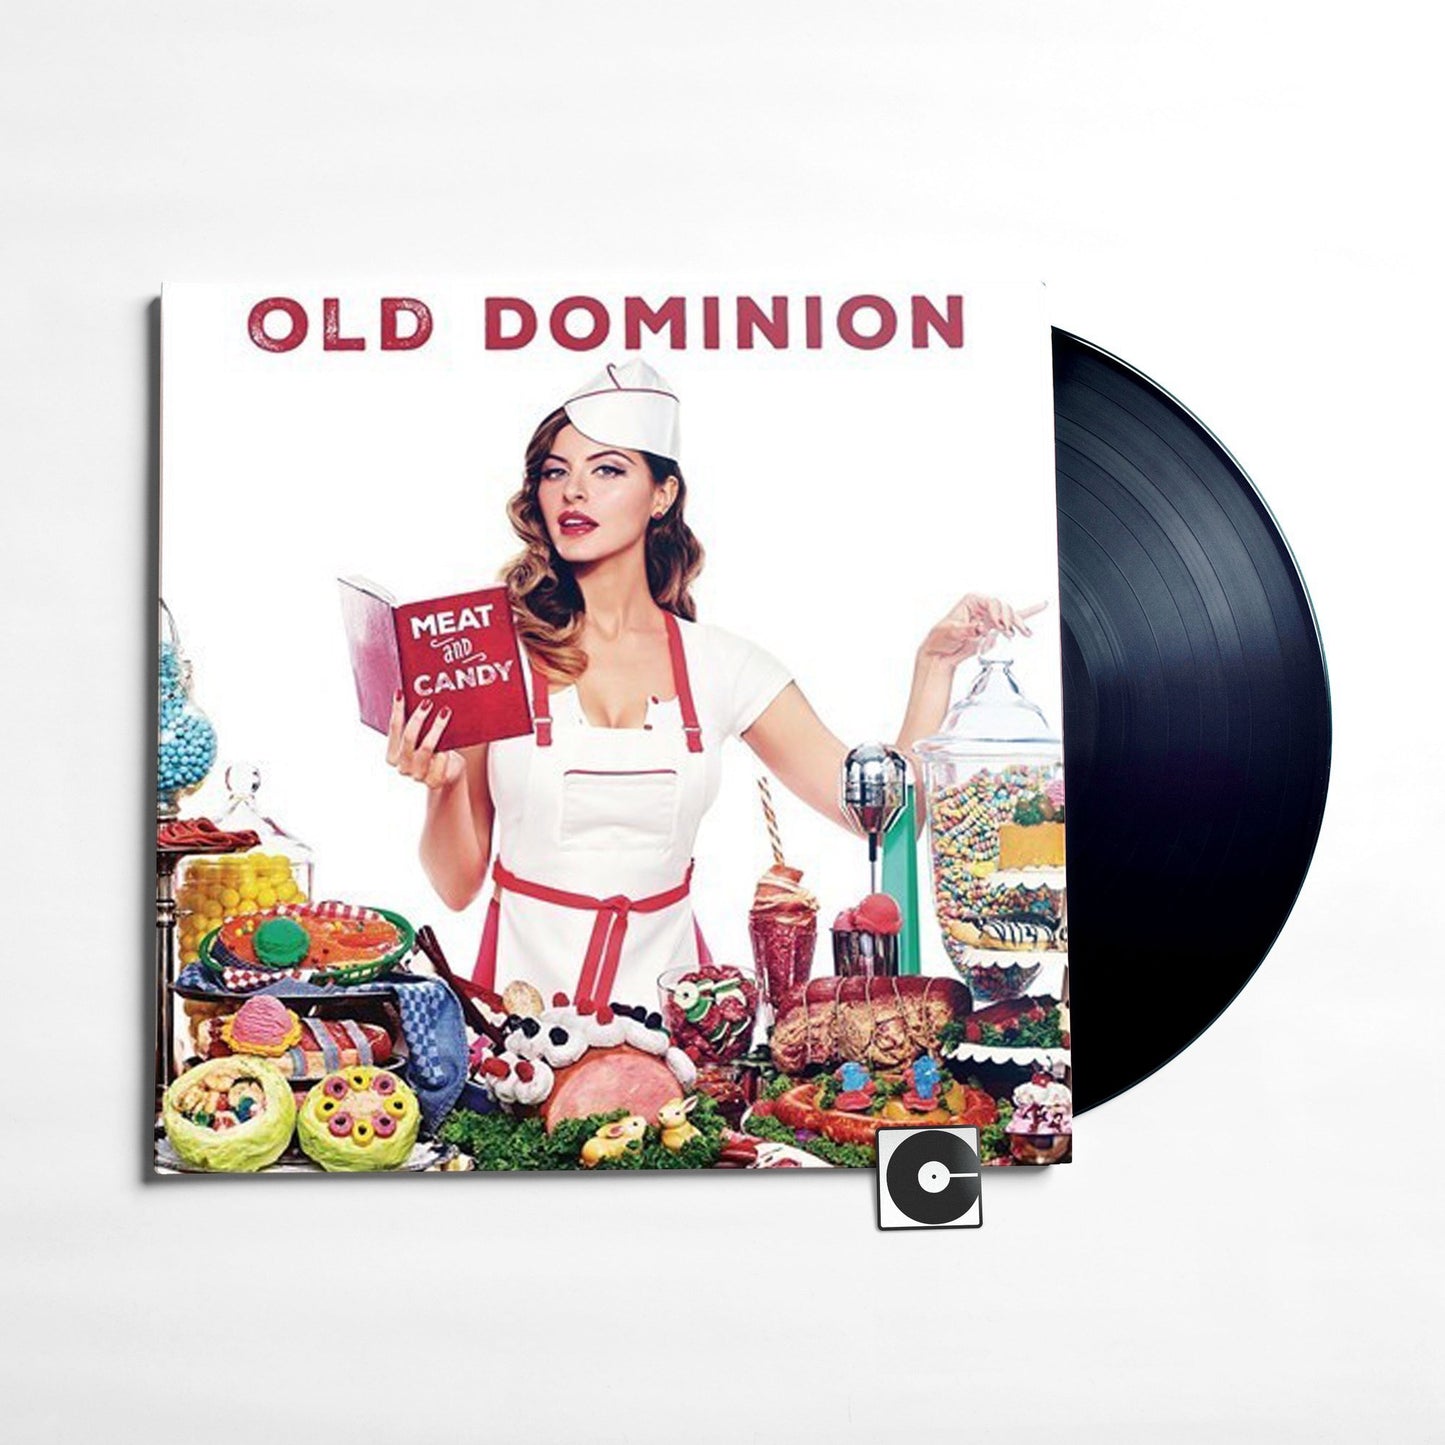 Old Dominion - "Meat And Candy"